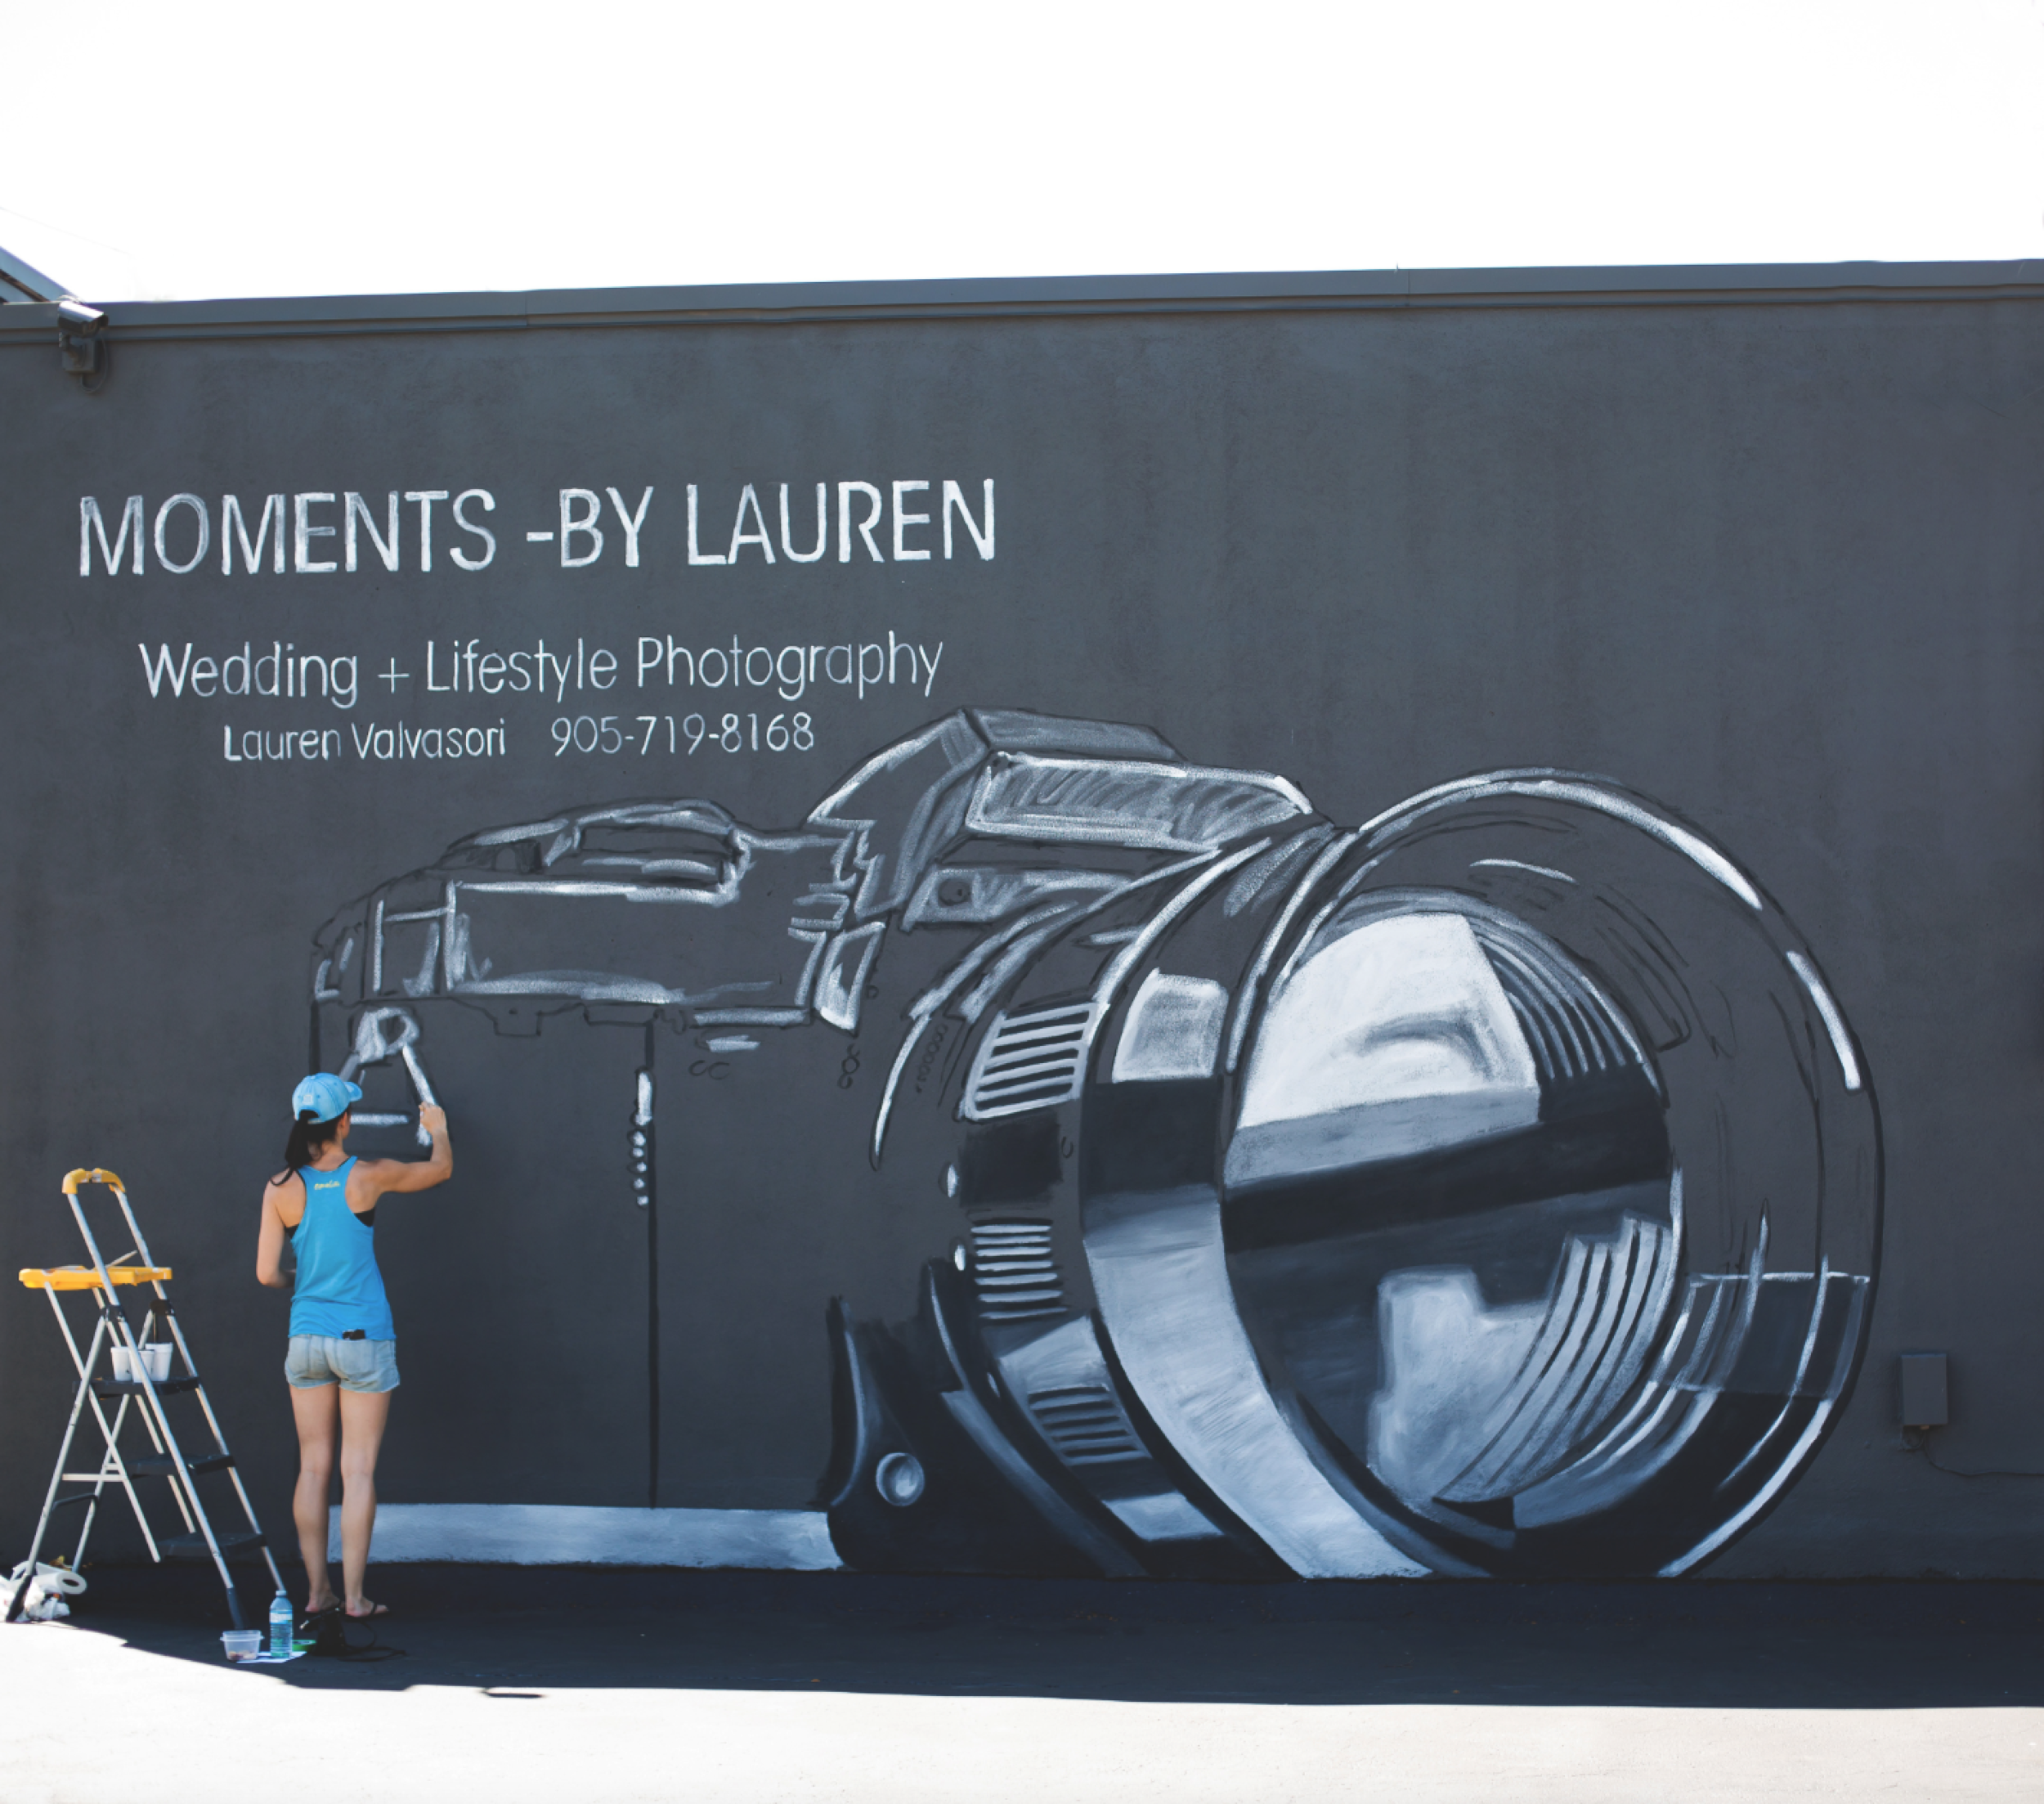 Moments-by-Lauren-Camera-Mural-Claire-Hall-Design-Photo-5.png